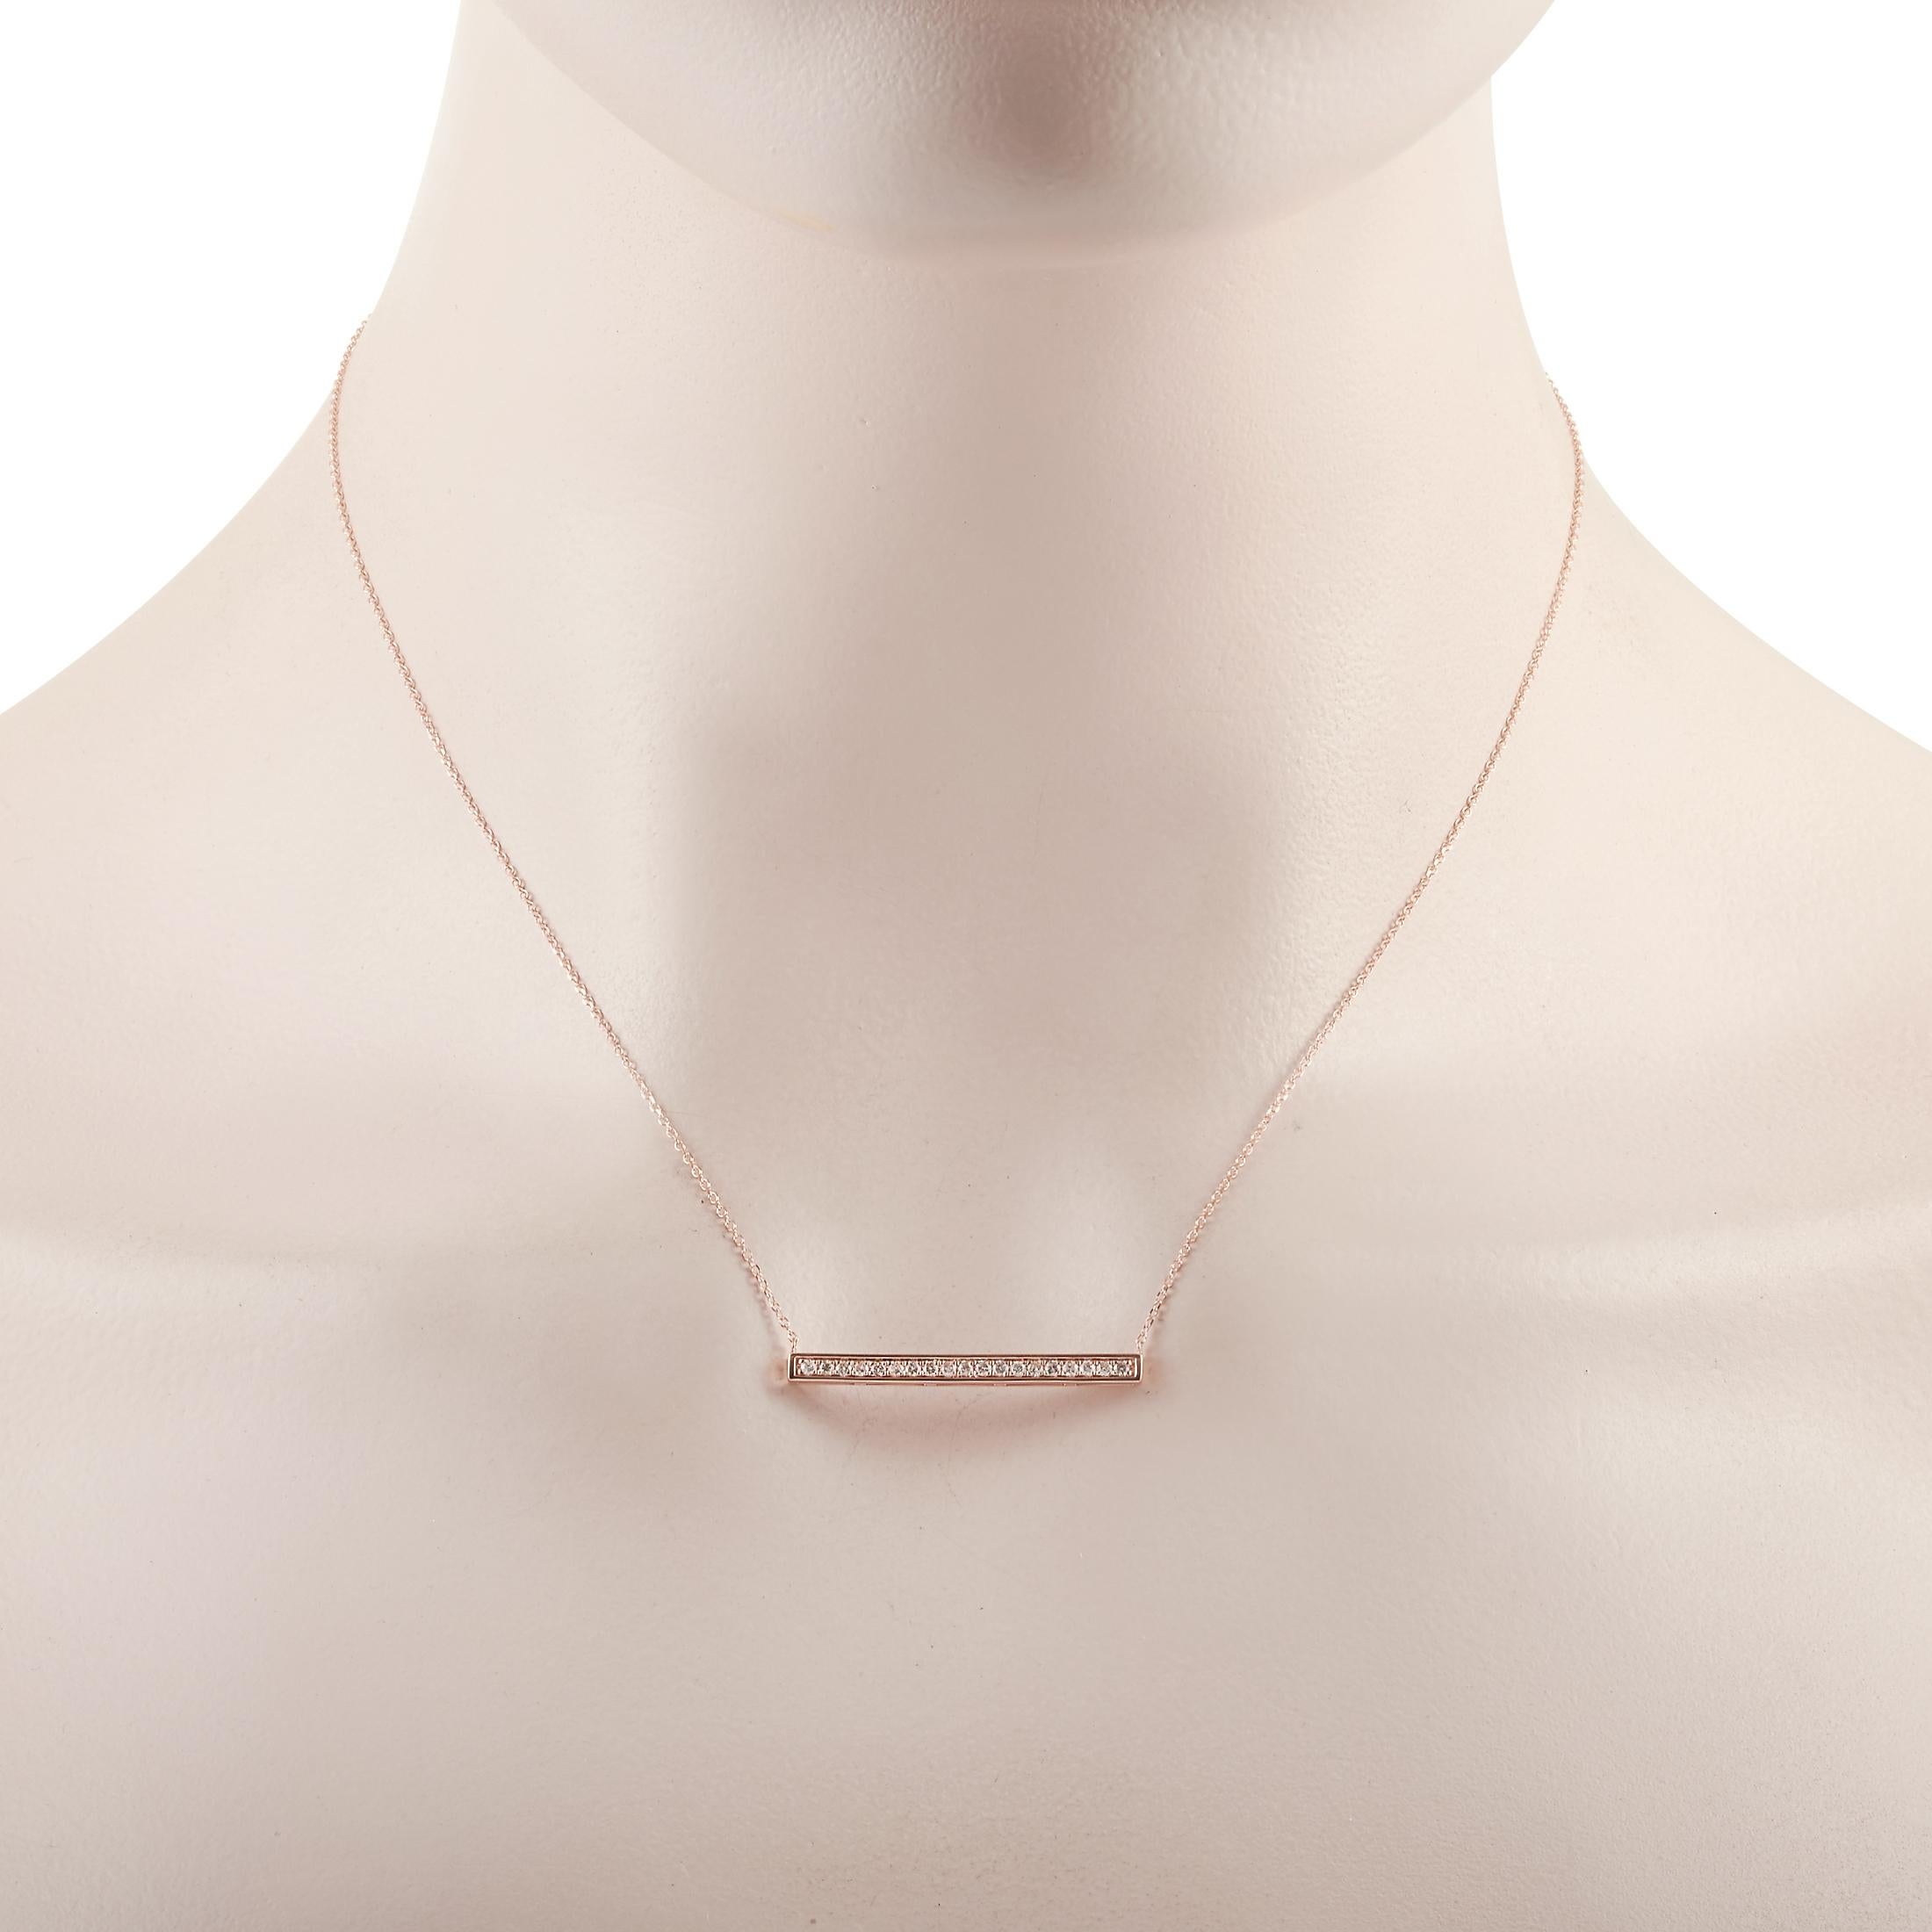 This LB Exclusive necklace is crafted from 14K rose gold and weighs 2.1 grams. It is presented with a 15” chain and boasts a pendant that measures 0.13” in length and 1.25” in width. The necklace is set with diamonds that total 0.25 carats.
 
